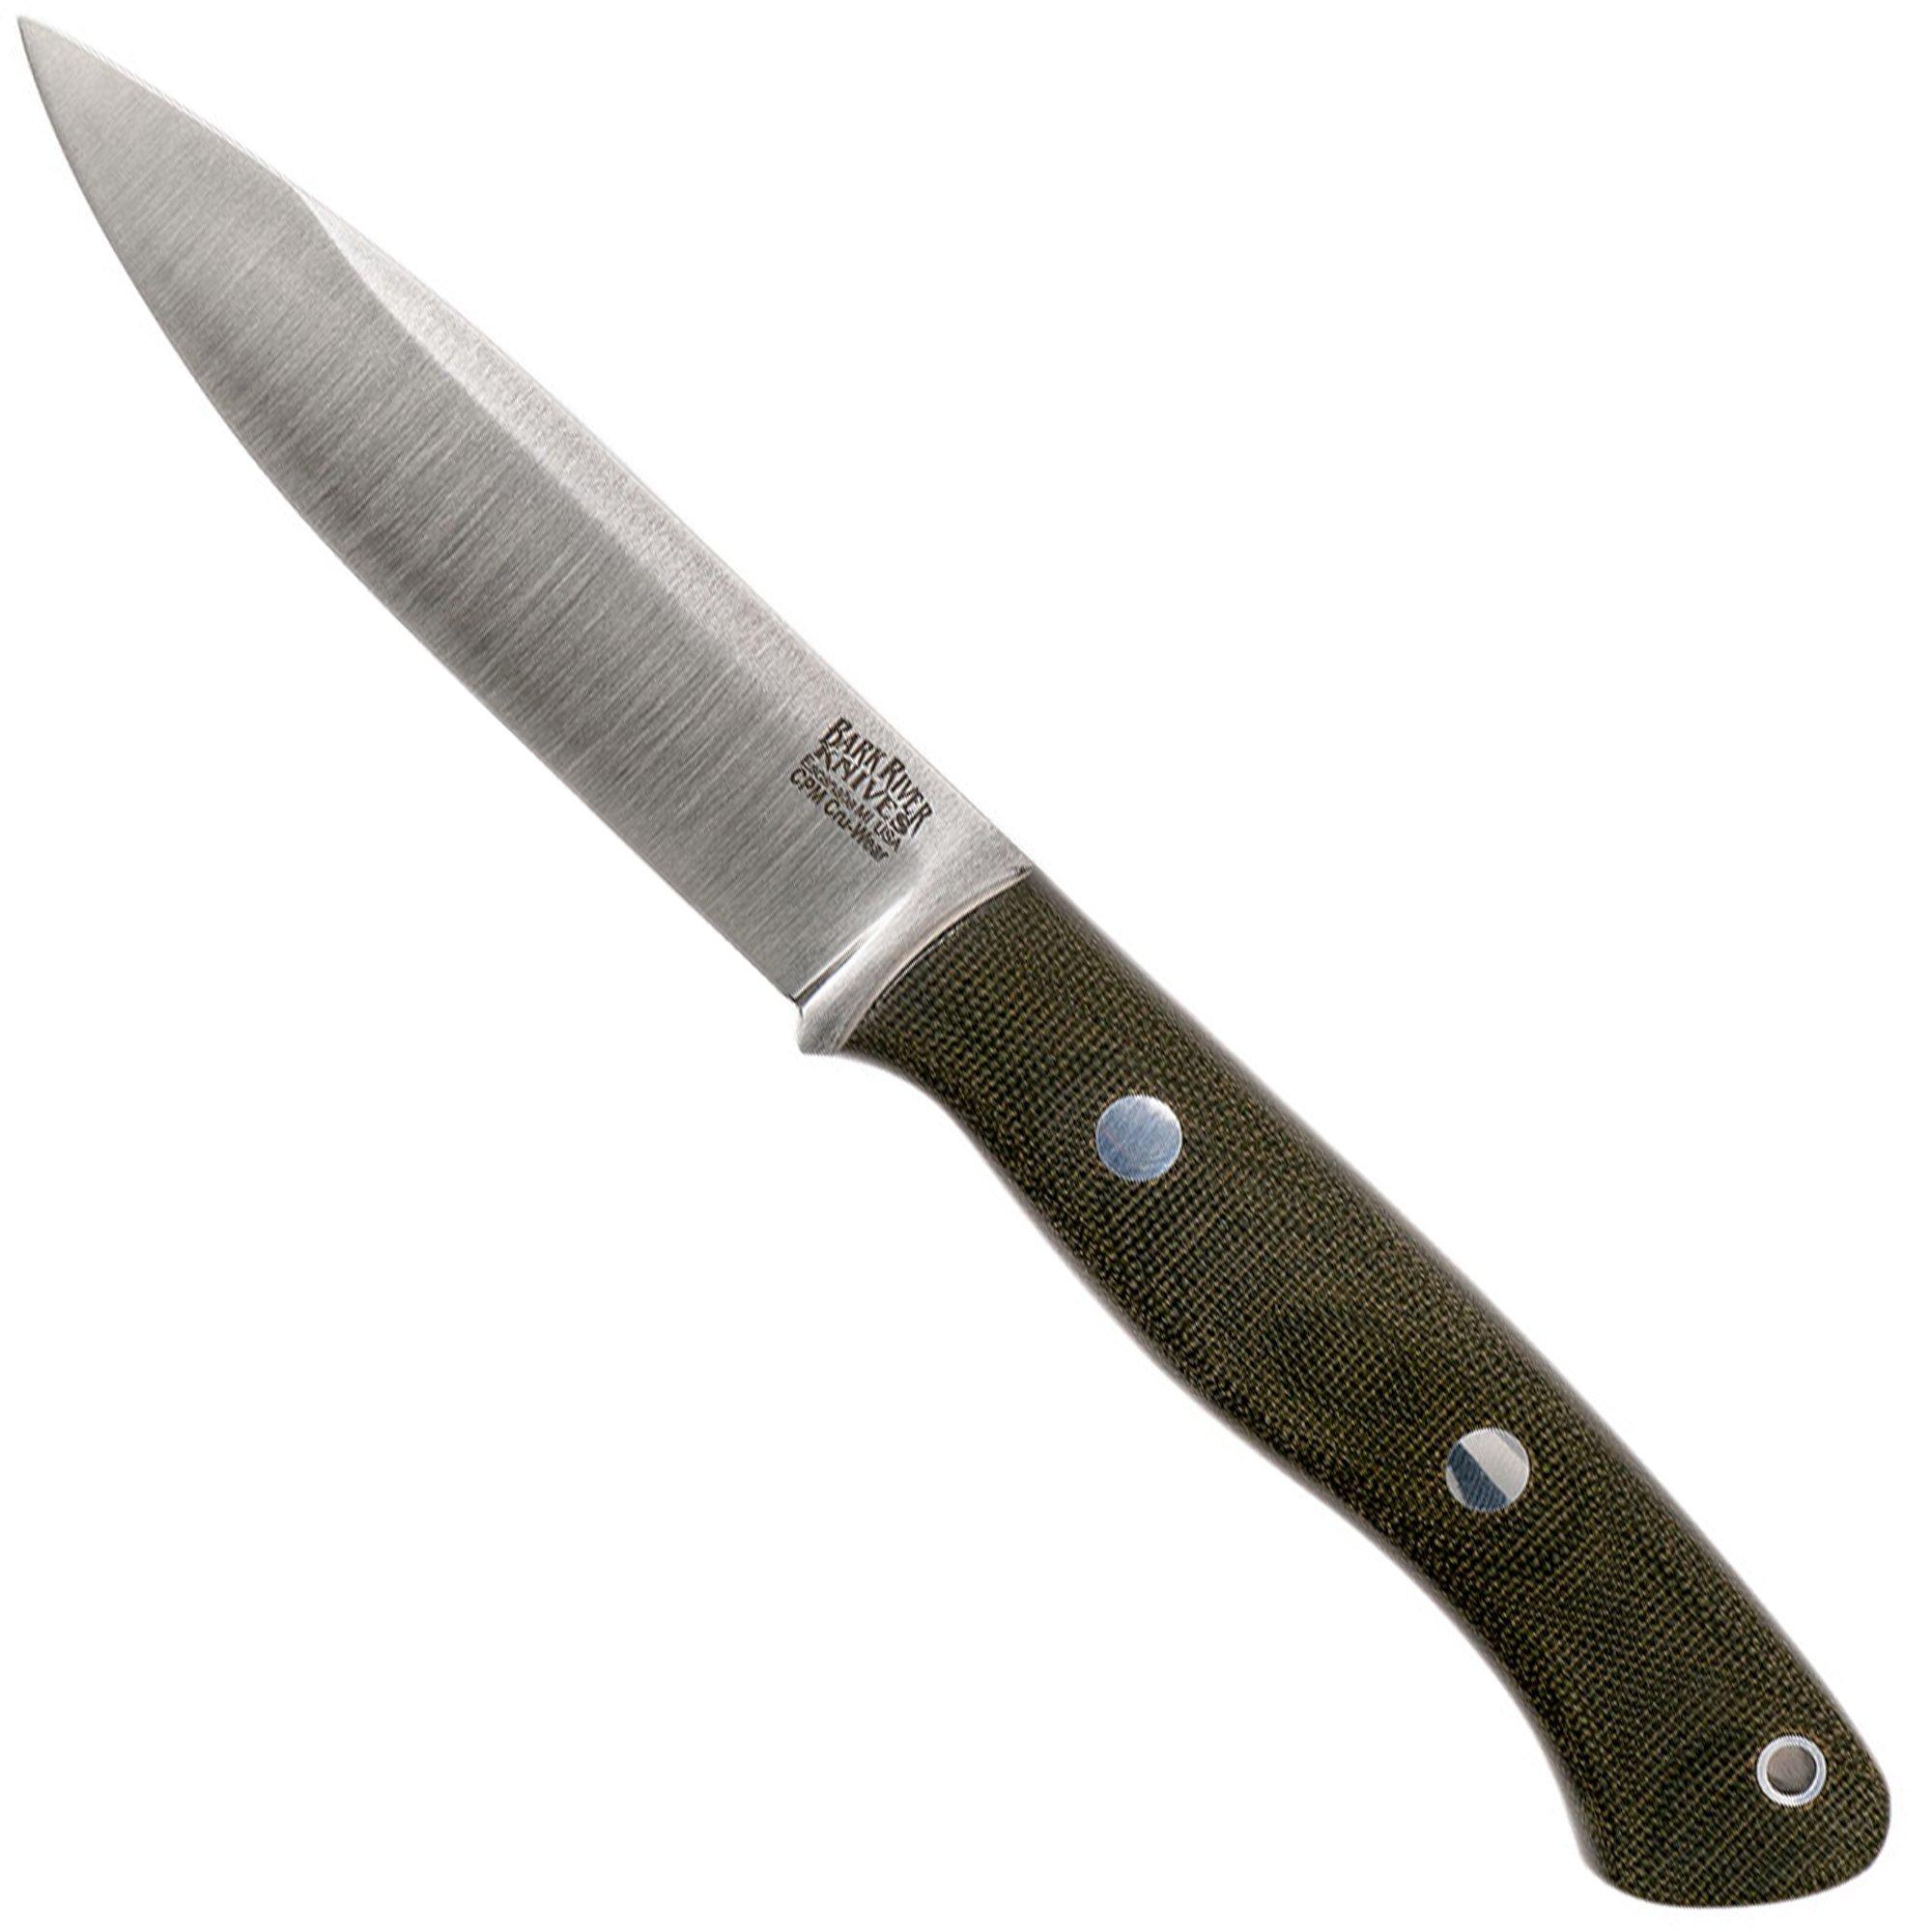 Bark River Aurora | All knives tested and in stock!